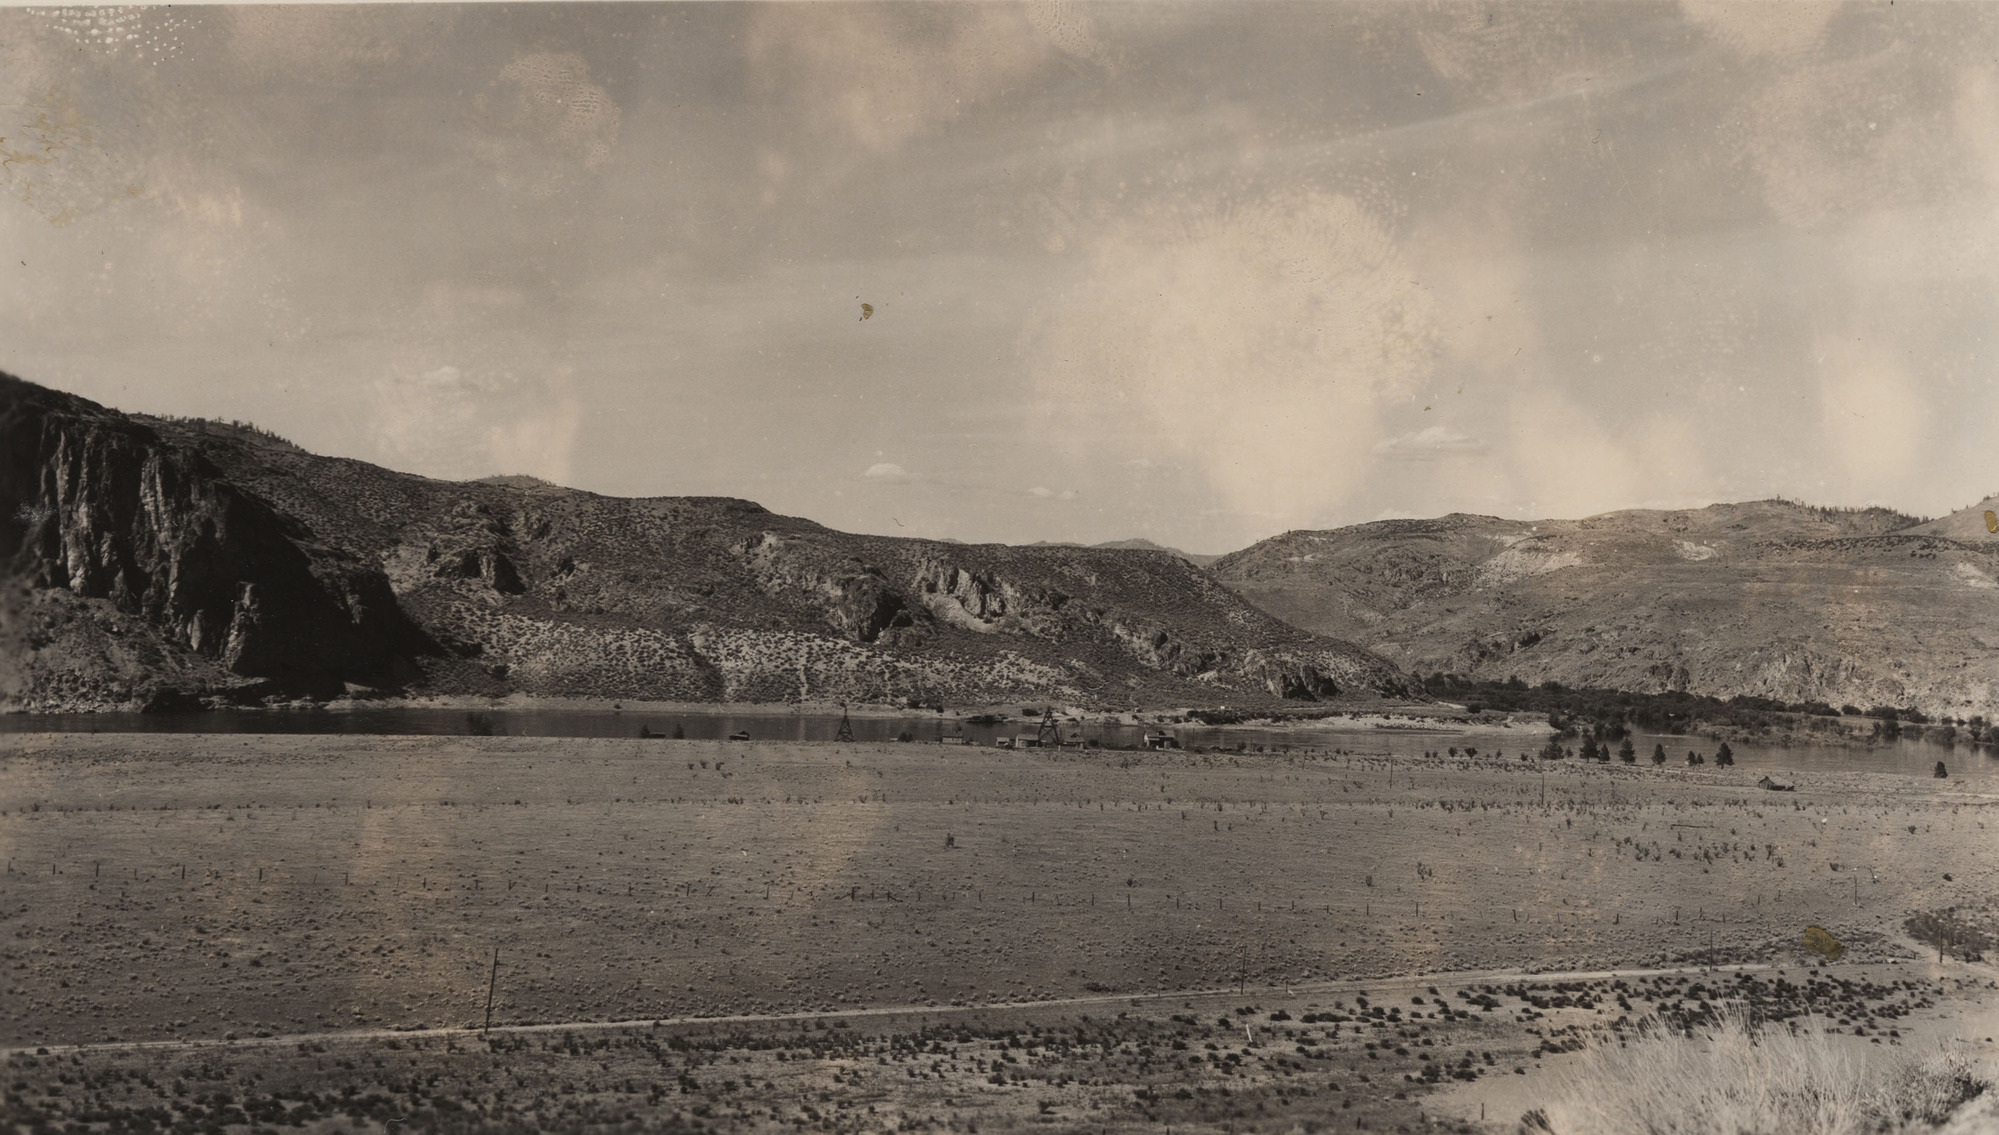 Slightly faded black and white photograph of a wide, bare floodplain and a river, with steep, rocky hills on the far side of the river